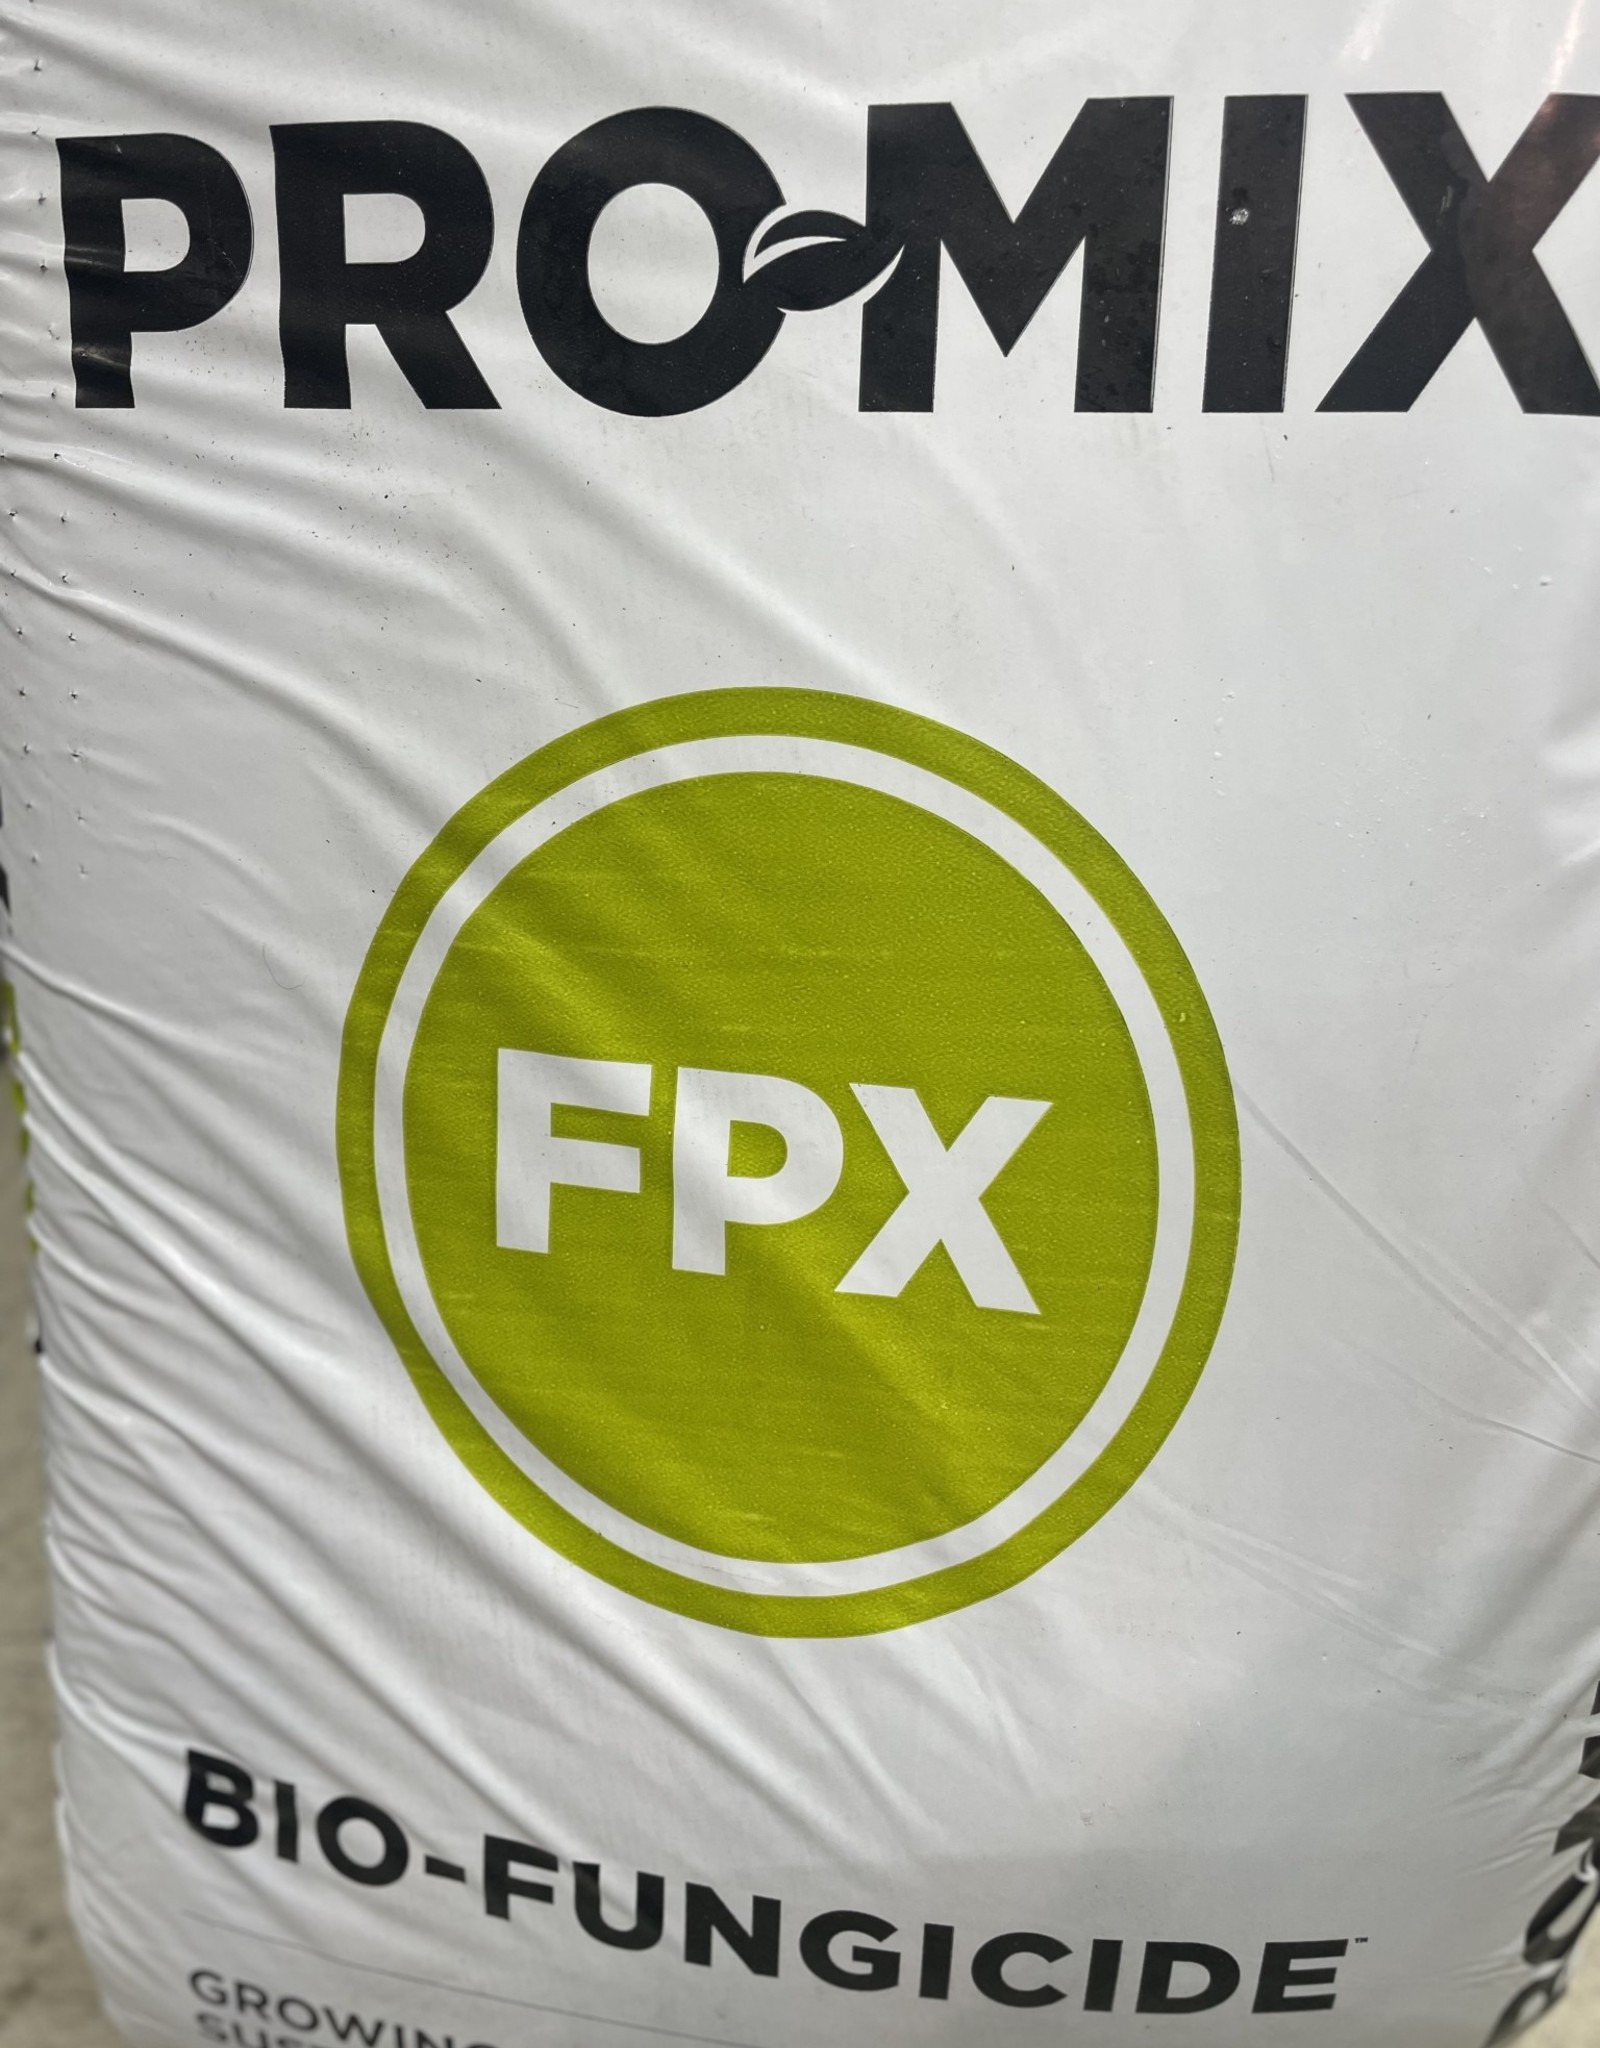 PRO-MIX Pro Mix Seed Starting B 2.8 cu ft   plug and germination now FPX